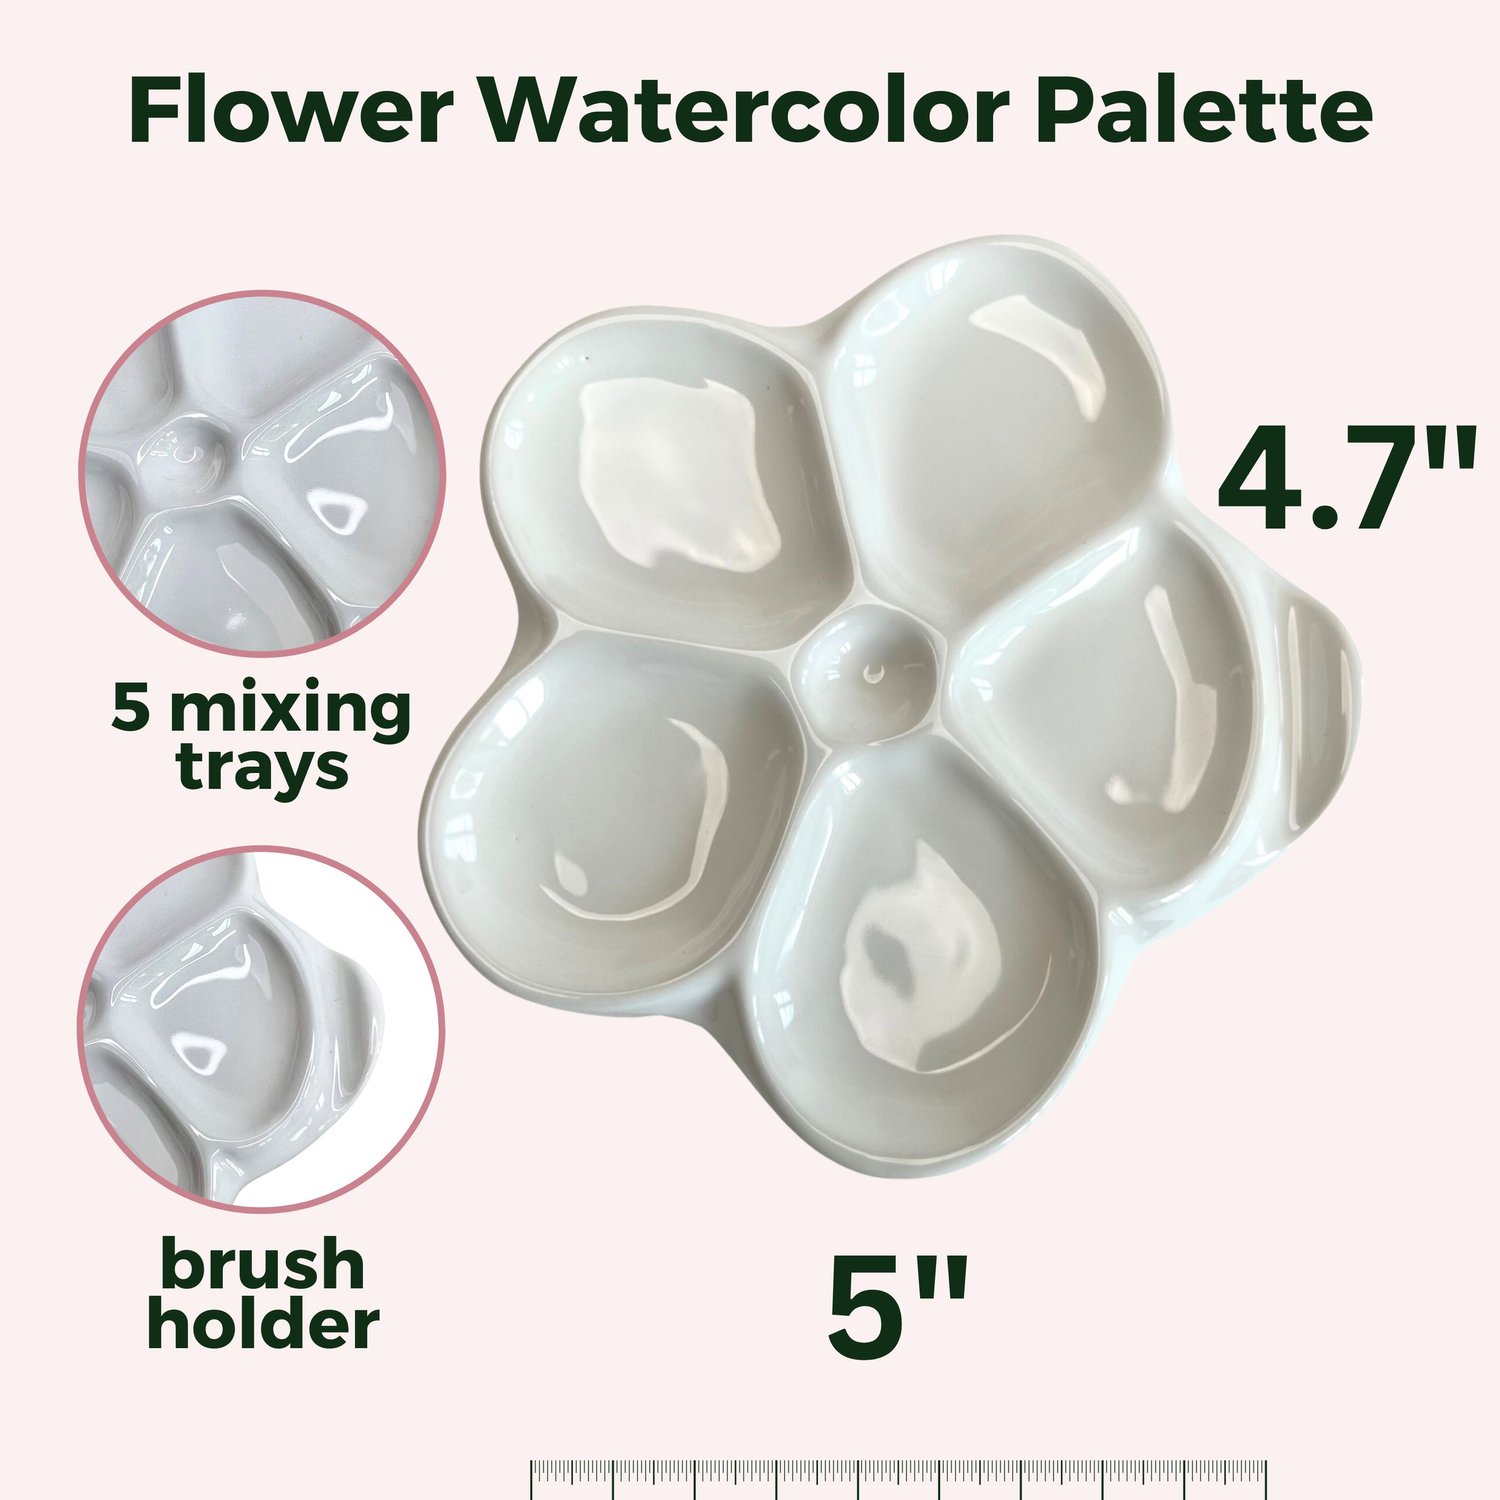 Basic Information: Paint Mixing Palette